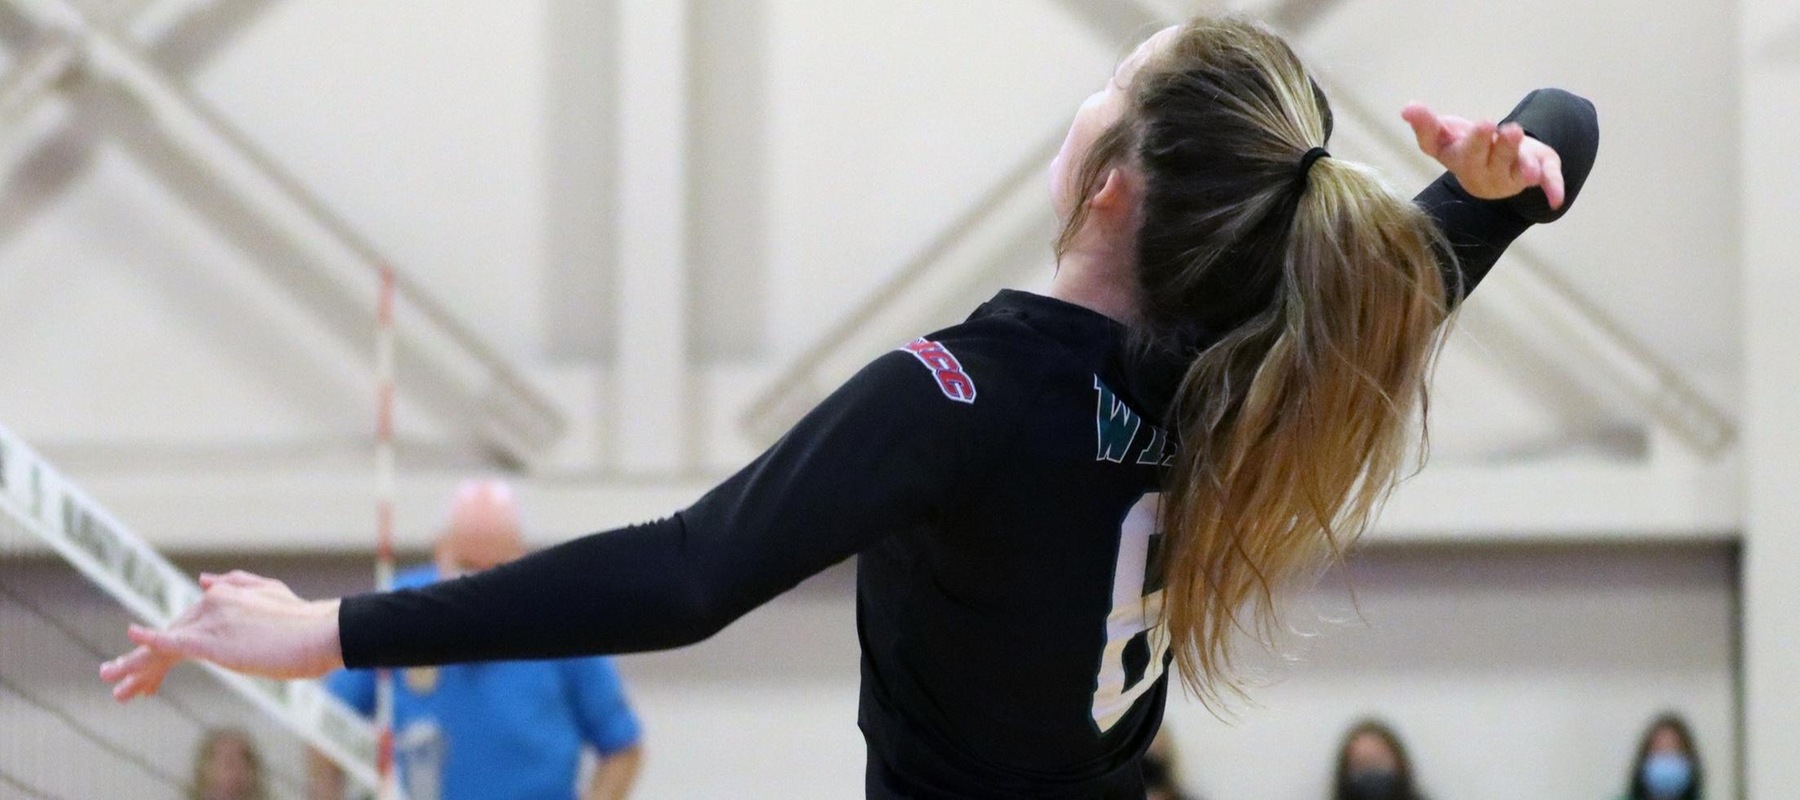 File photo of Jessica Connelly who led the Wildcats with 9 kills at Goldey-Beacom. Copyright 2021; Wilmington University. All rights reserved. Photo by Dan Lauletta. October 23, 2021 vs. Caldwell.